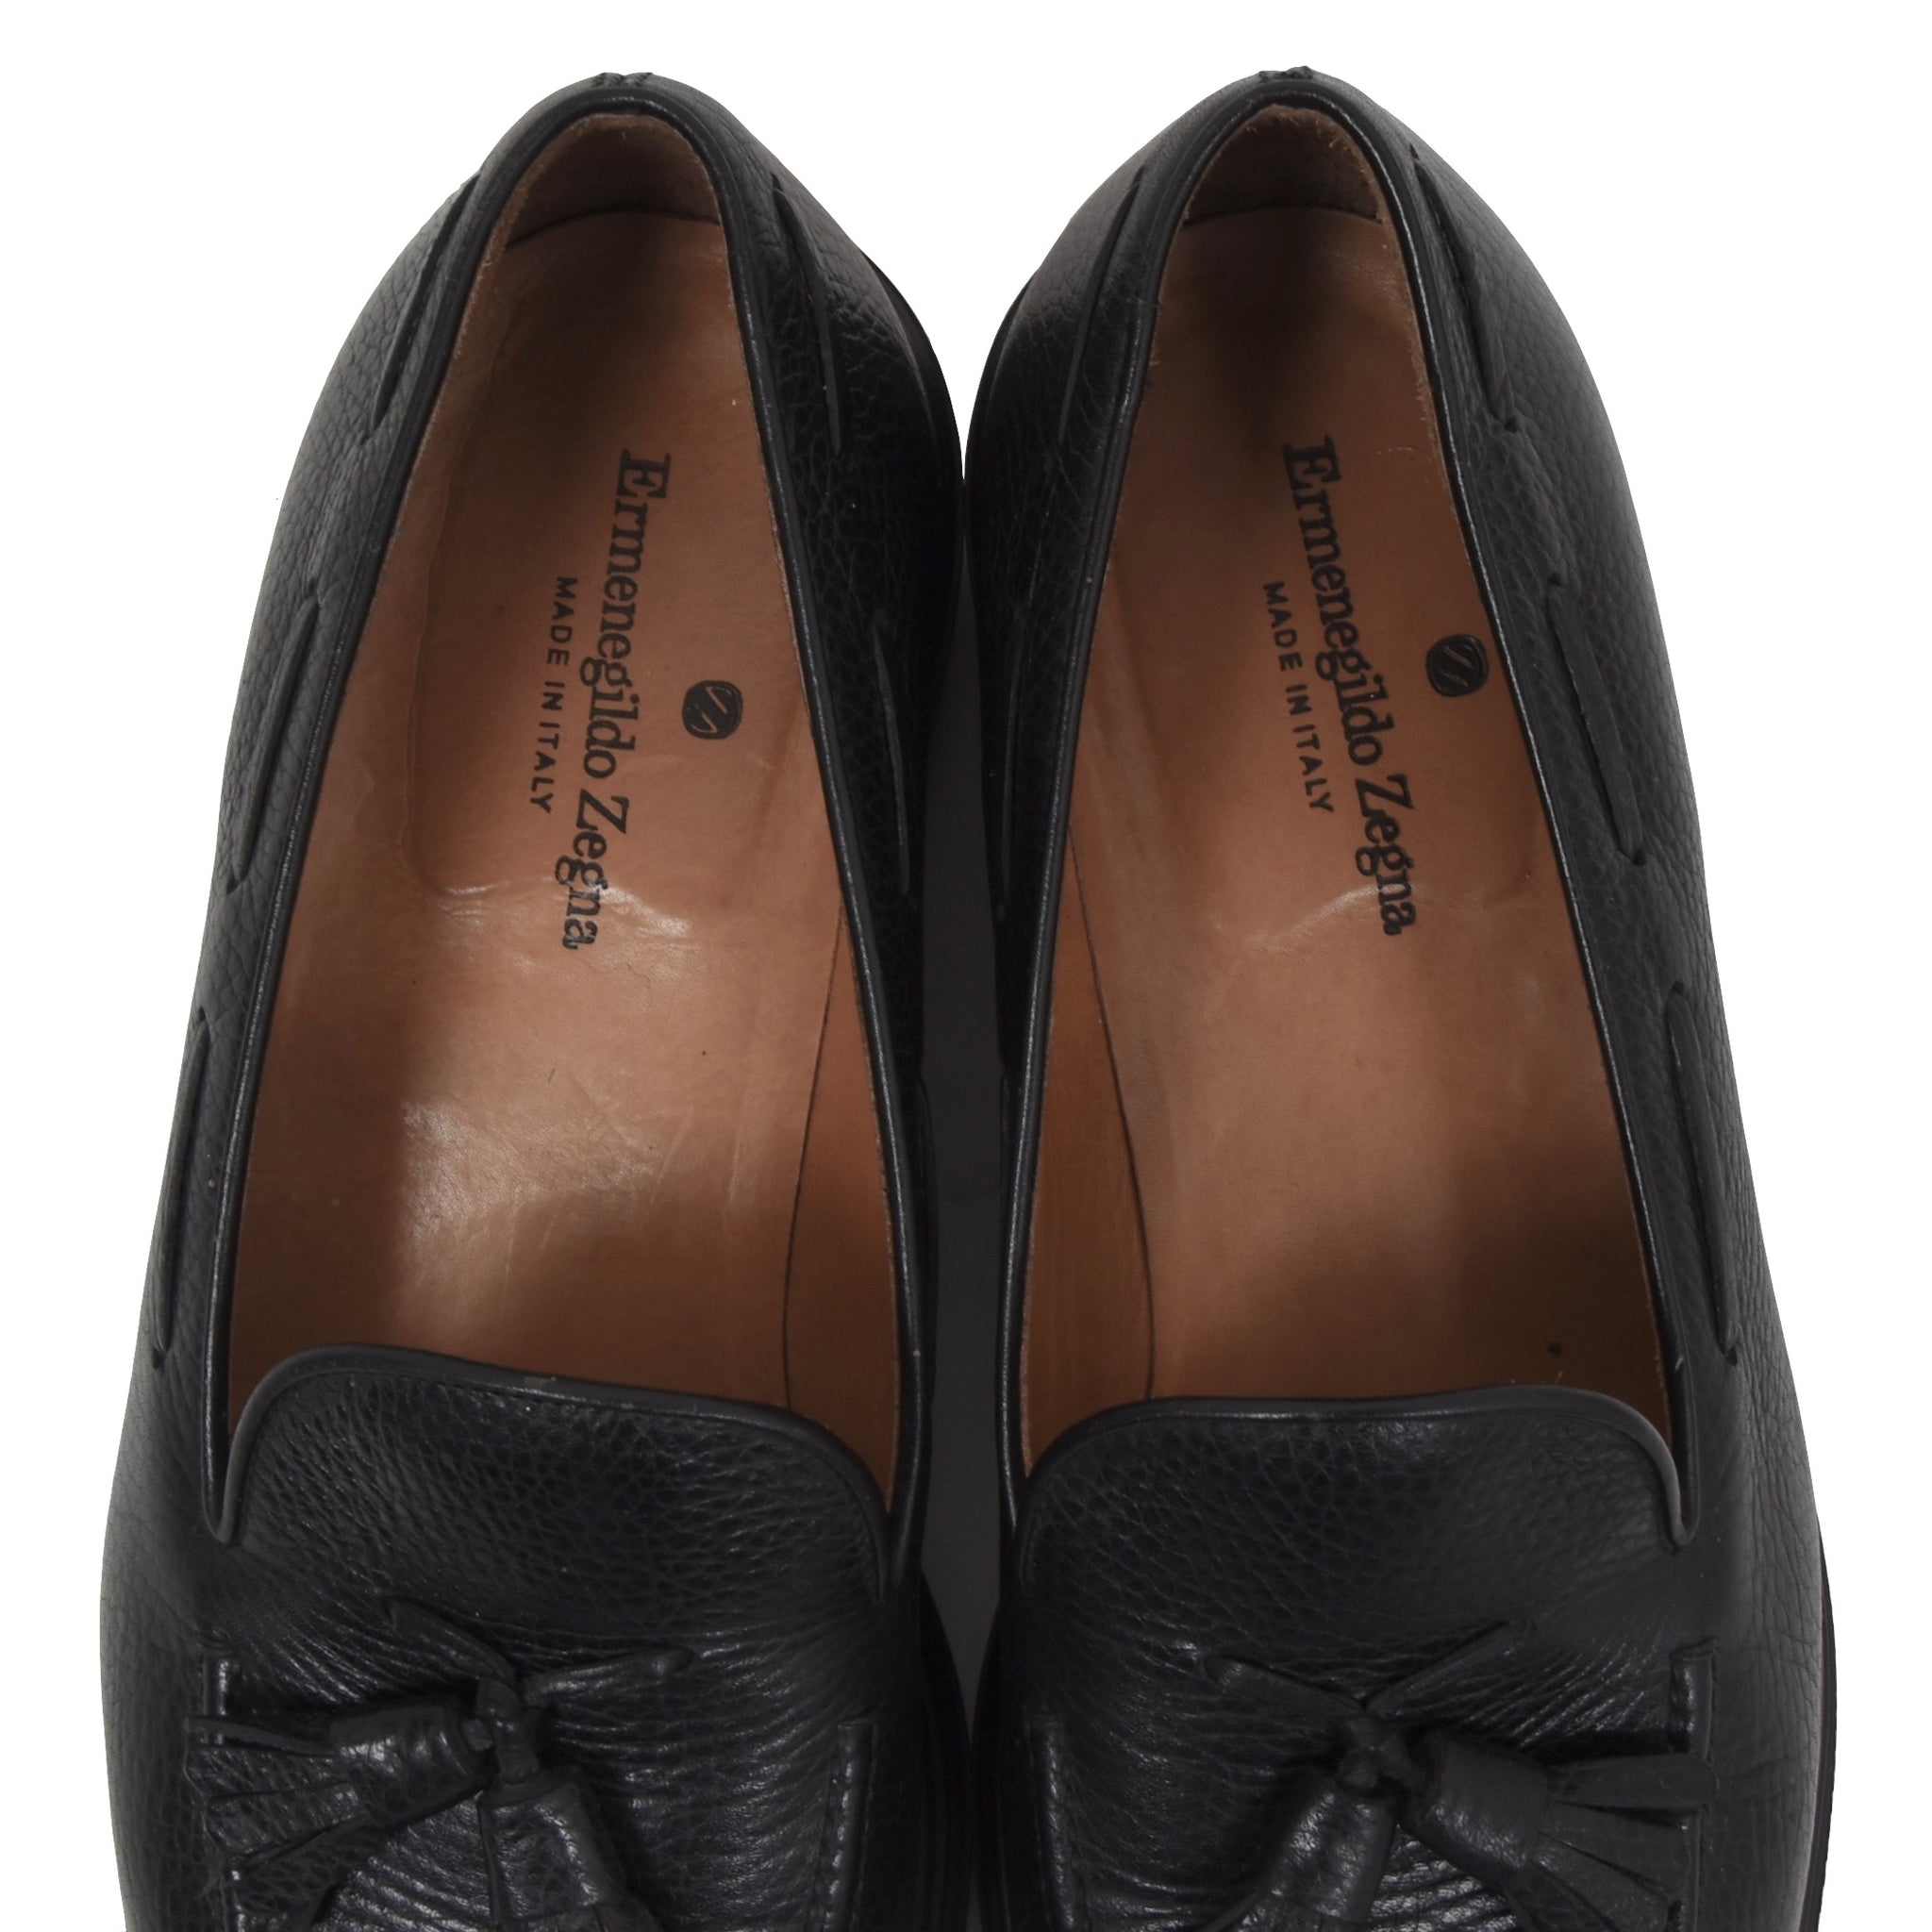 black loafers size 3